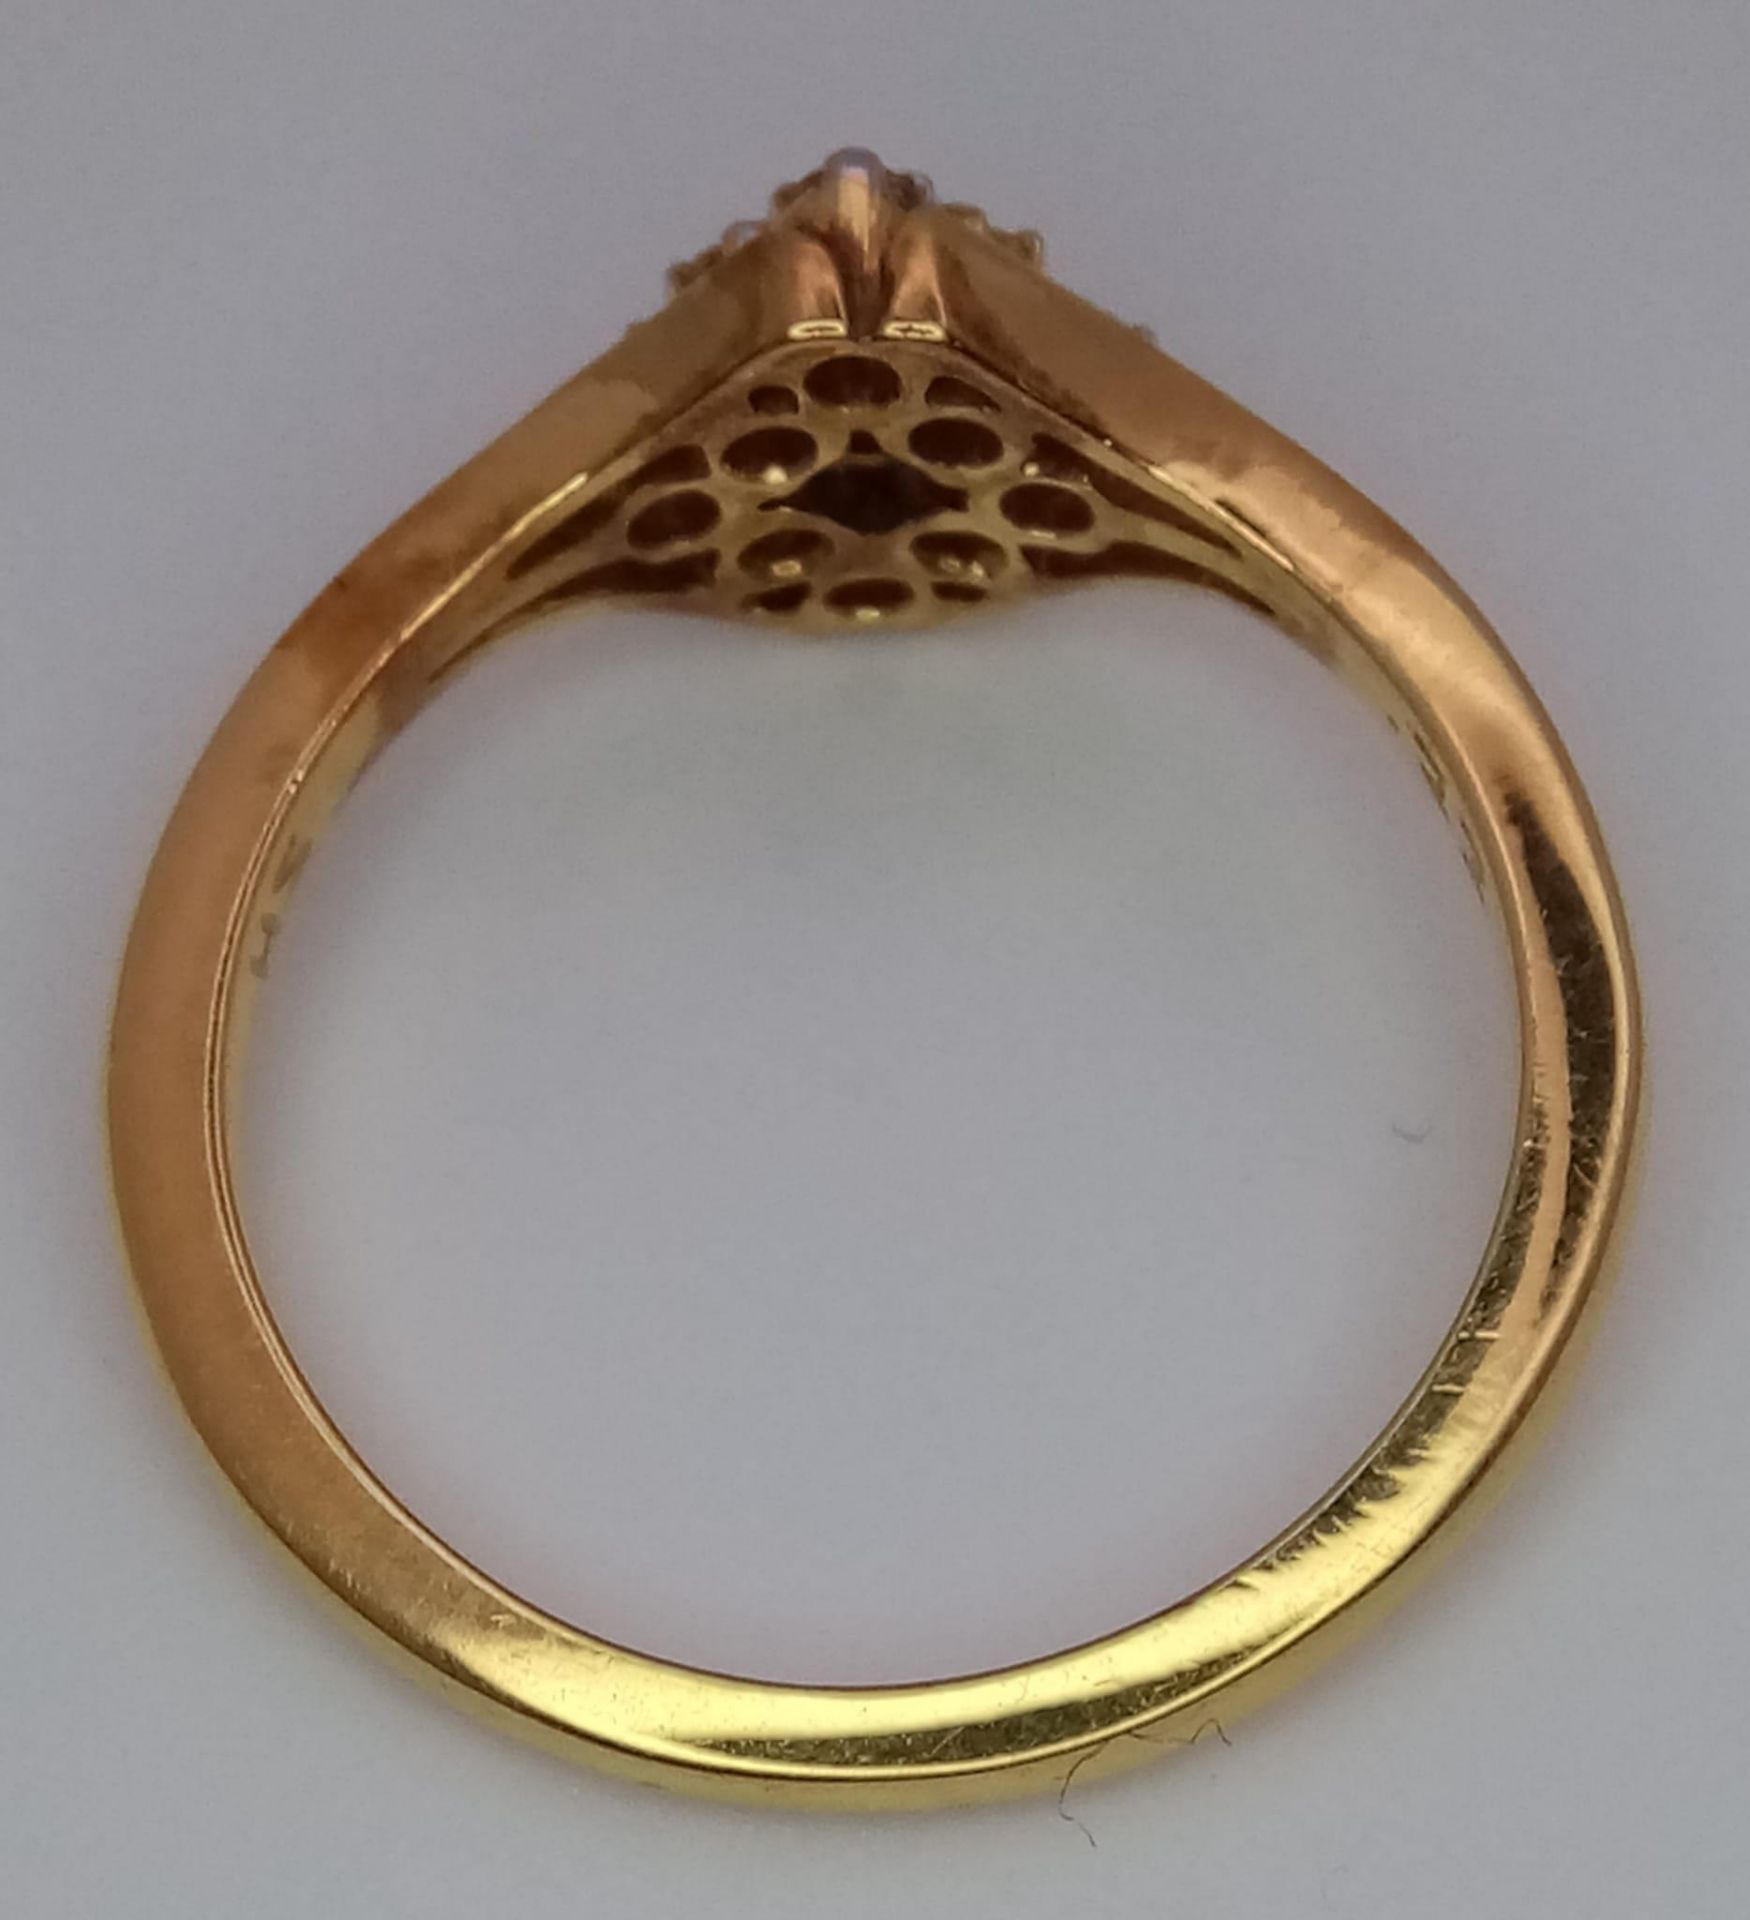 A 18K YELLOW GOLD DIAMOND RING 3.2G SIZE N 1/2 ref: H 5001 - Image 3 of 4